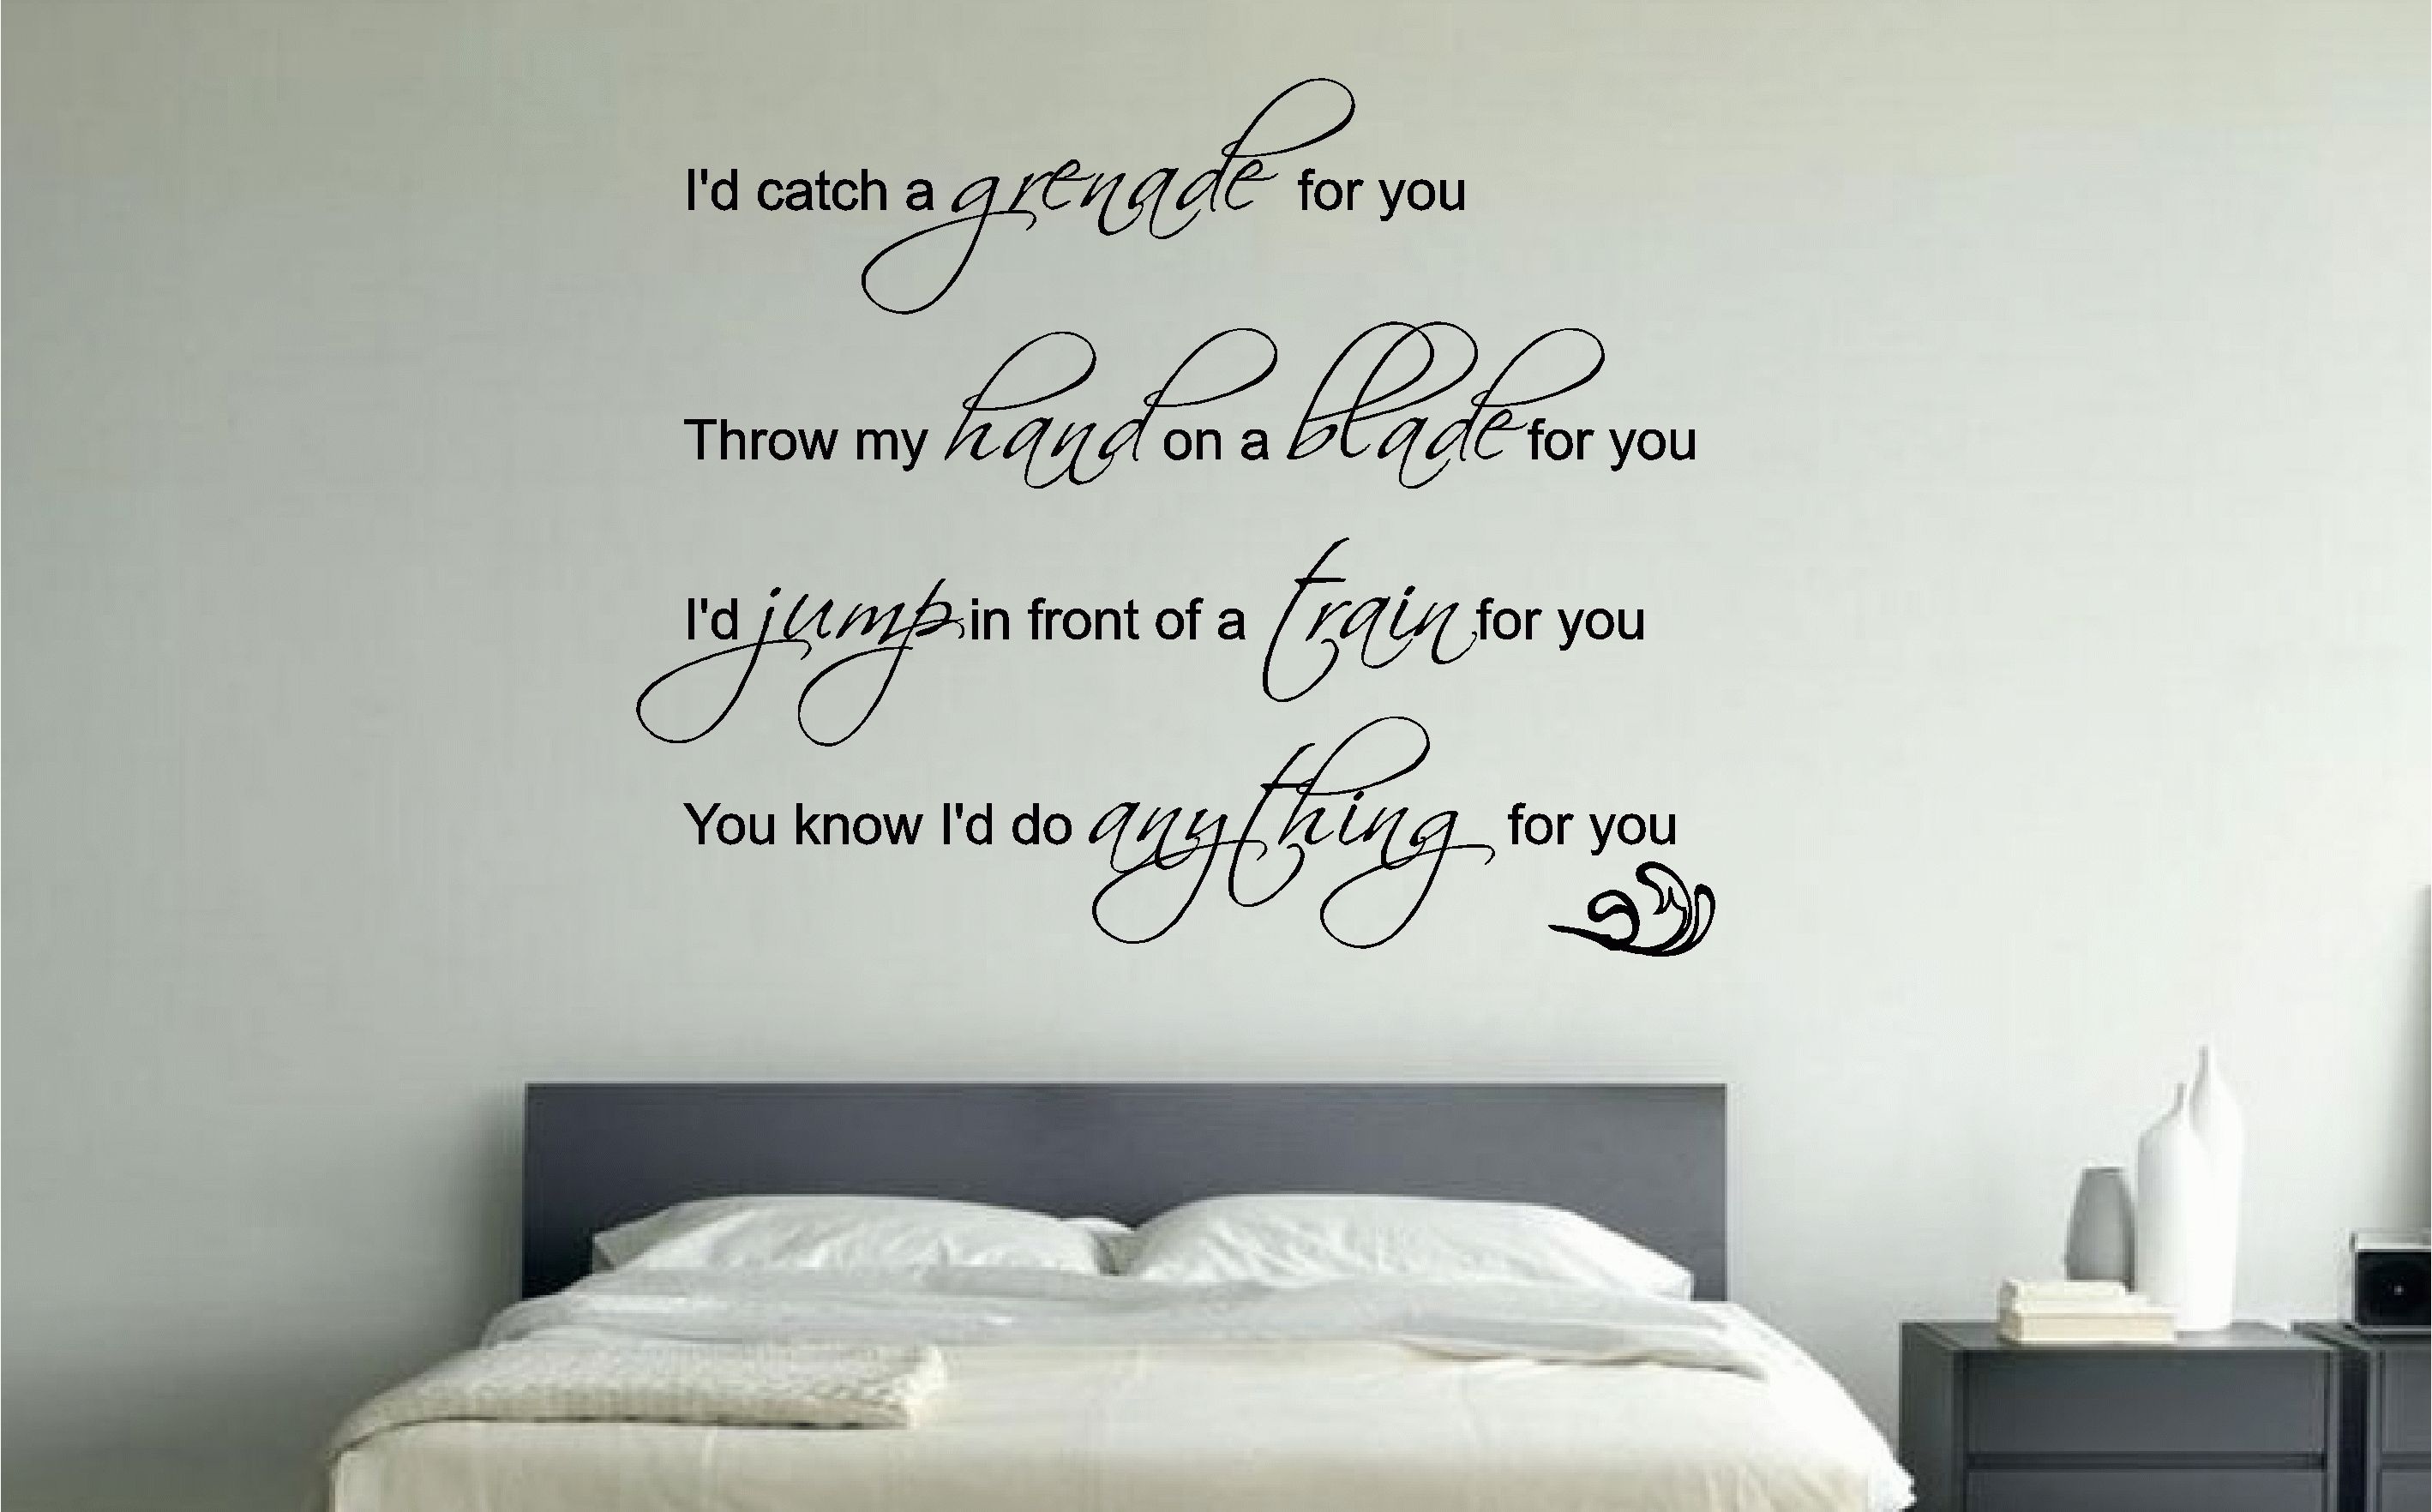 Bruno Mars Grenade Lyrics Music Wall Art Sticker Decal Bedroom Throughout Most Current Wall Art Decals (View 15 of 15)